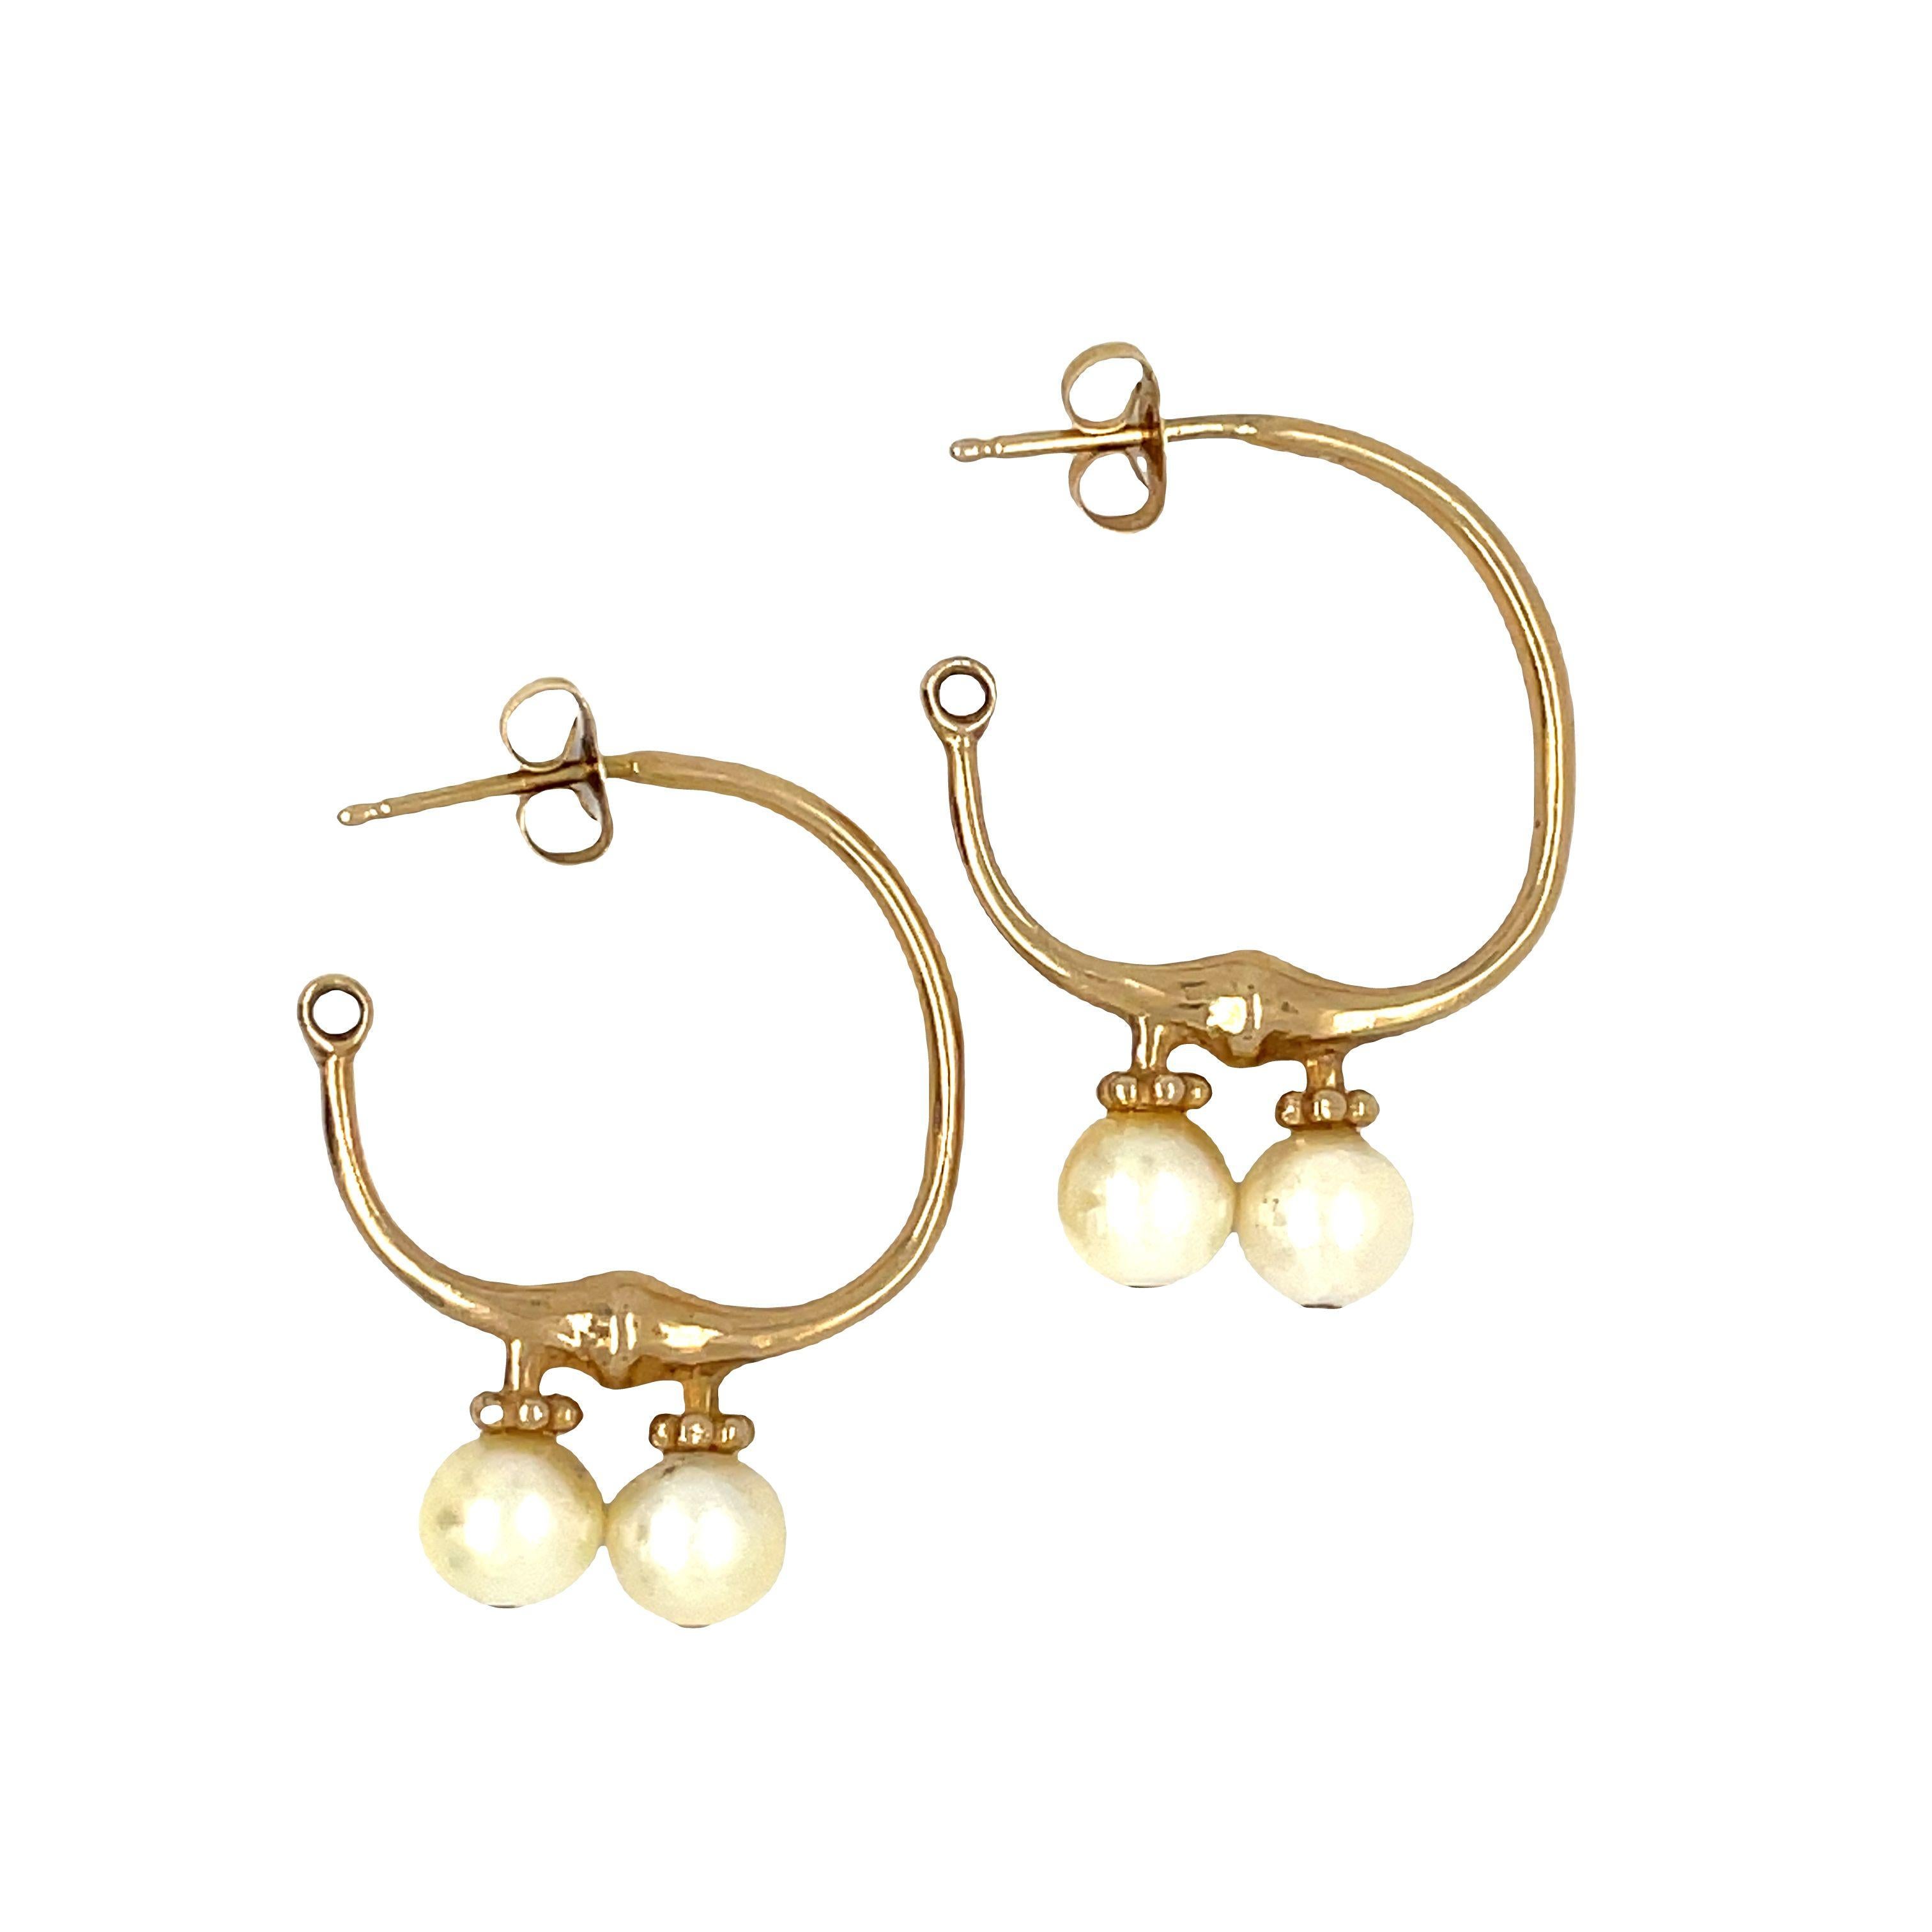 Vintage Pearl Hoop Earrings in 14 Karat Yellow Gold In Excellent Condition For Sale In beverly hills, CA